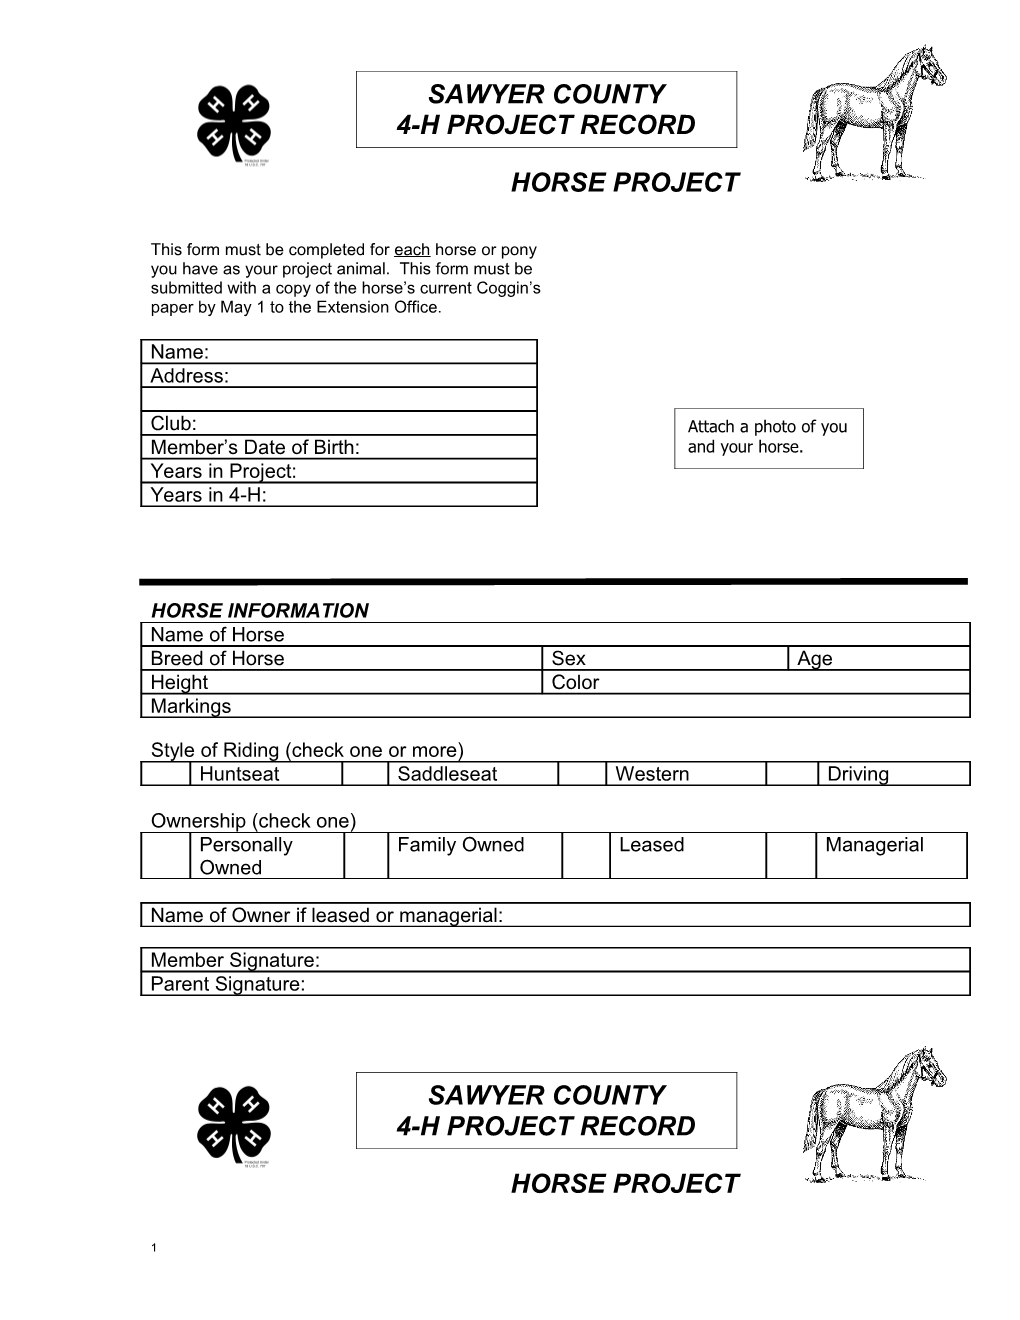 This Form Must Be Completed for Each Horse Or Pony